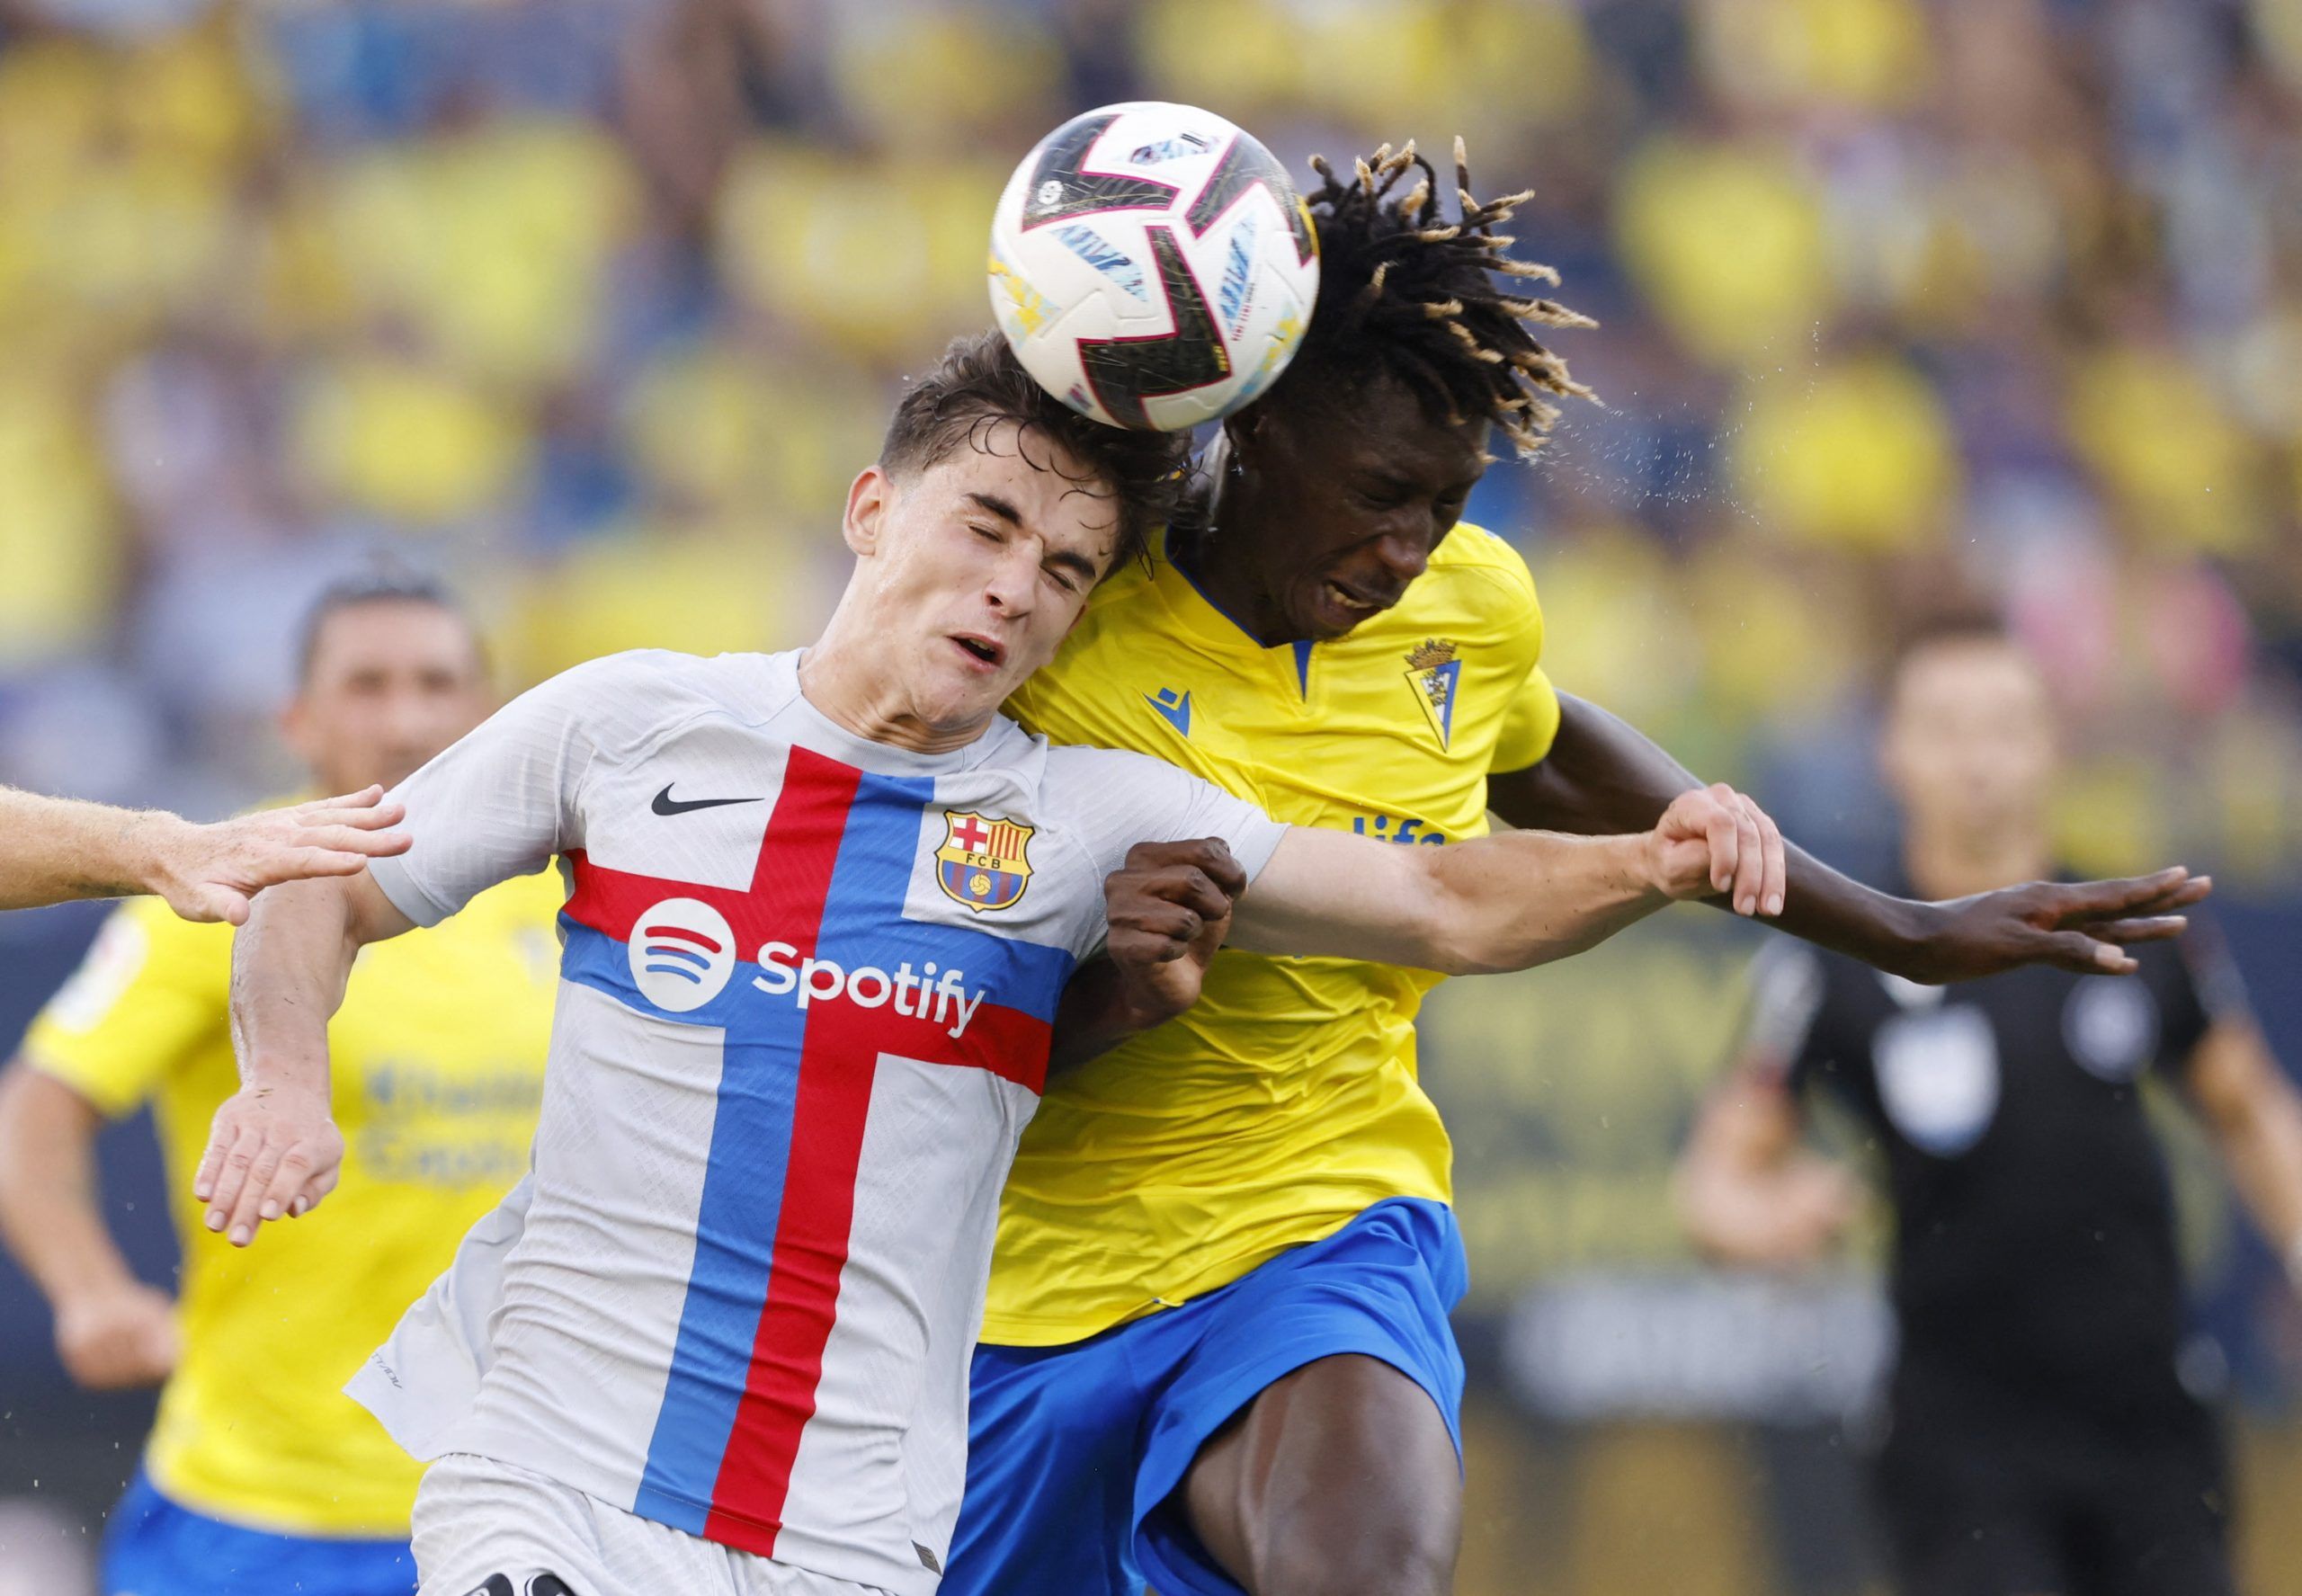 Southampton in the race to sign Senegalese starlet Momo Mbaye -Southampton News